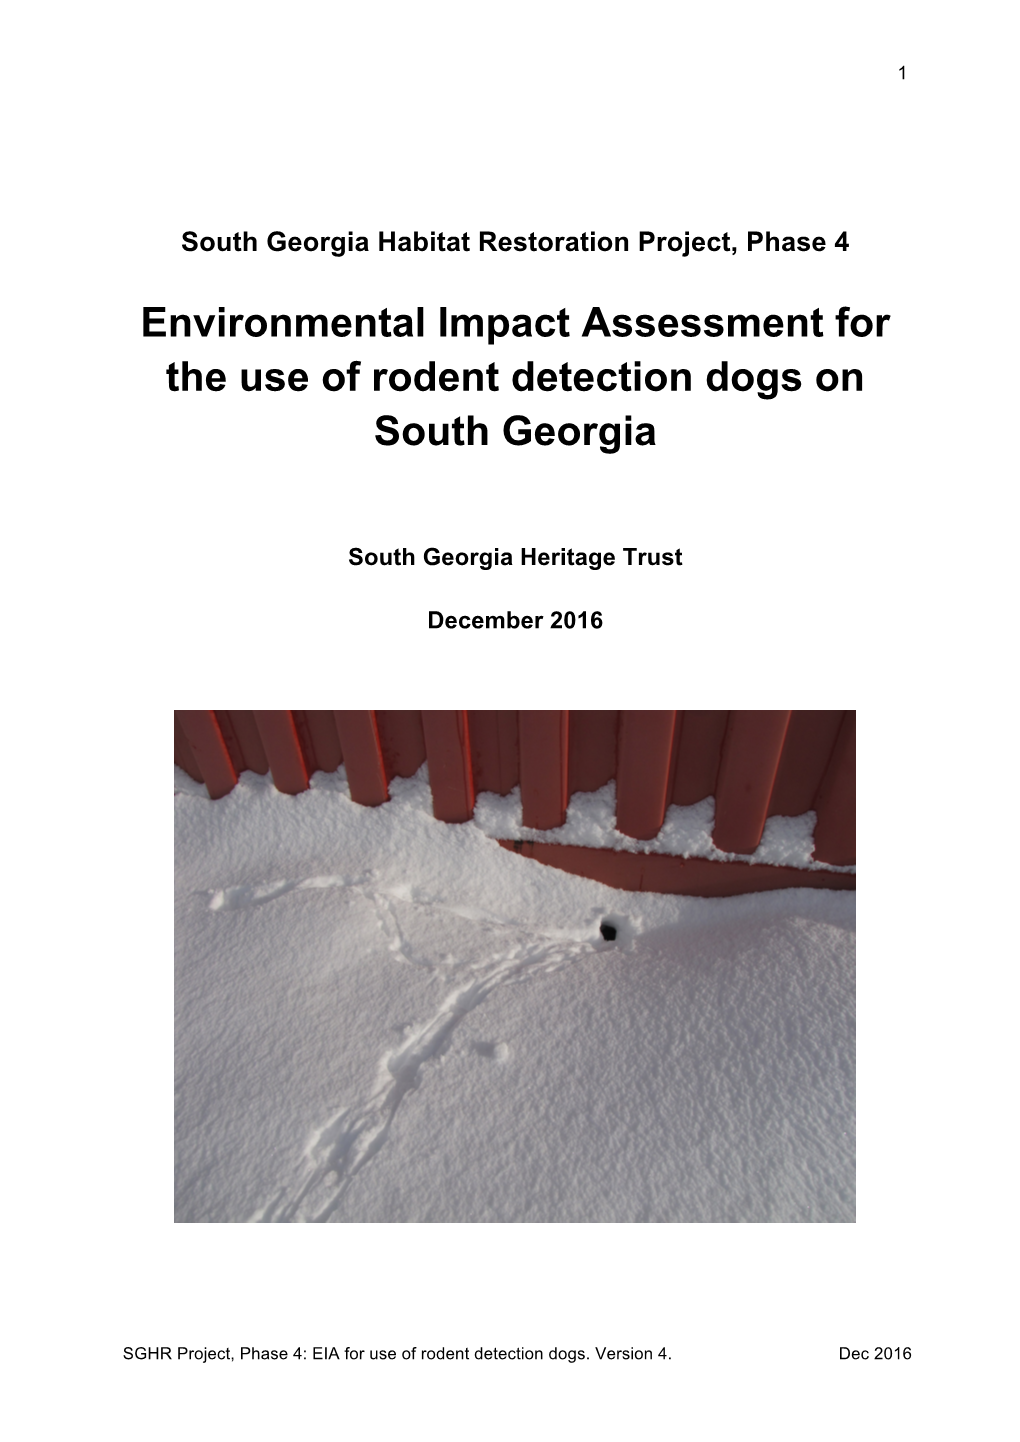 Environmental Impact Assessment for the Use of Rodent Detection Dogs on South Georgia